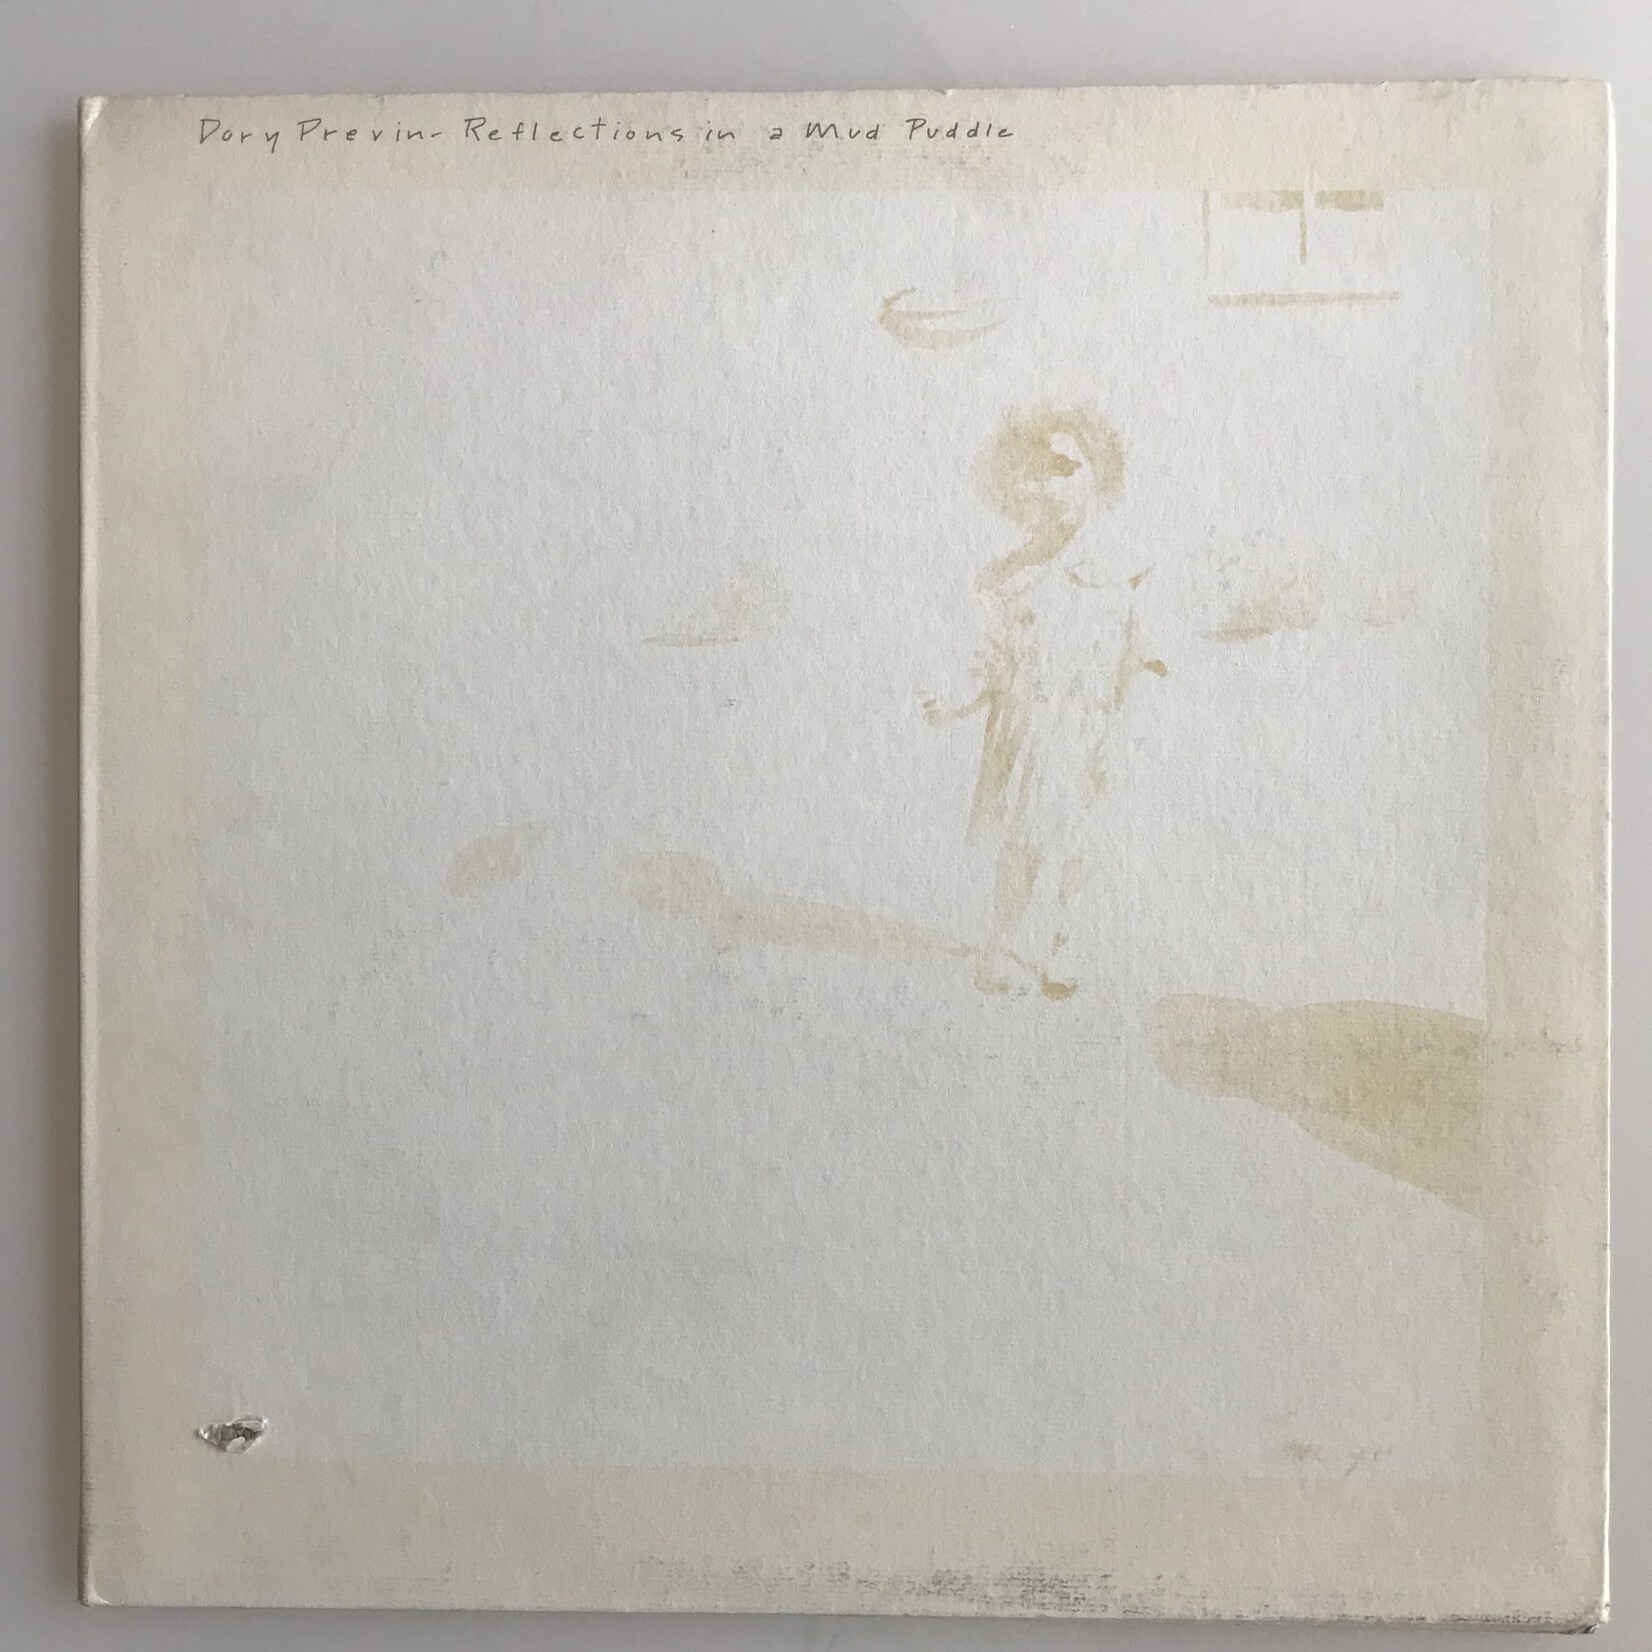 Dory Previn - Reflections In A Mud Puddle - Vinyl LP (USED)